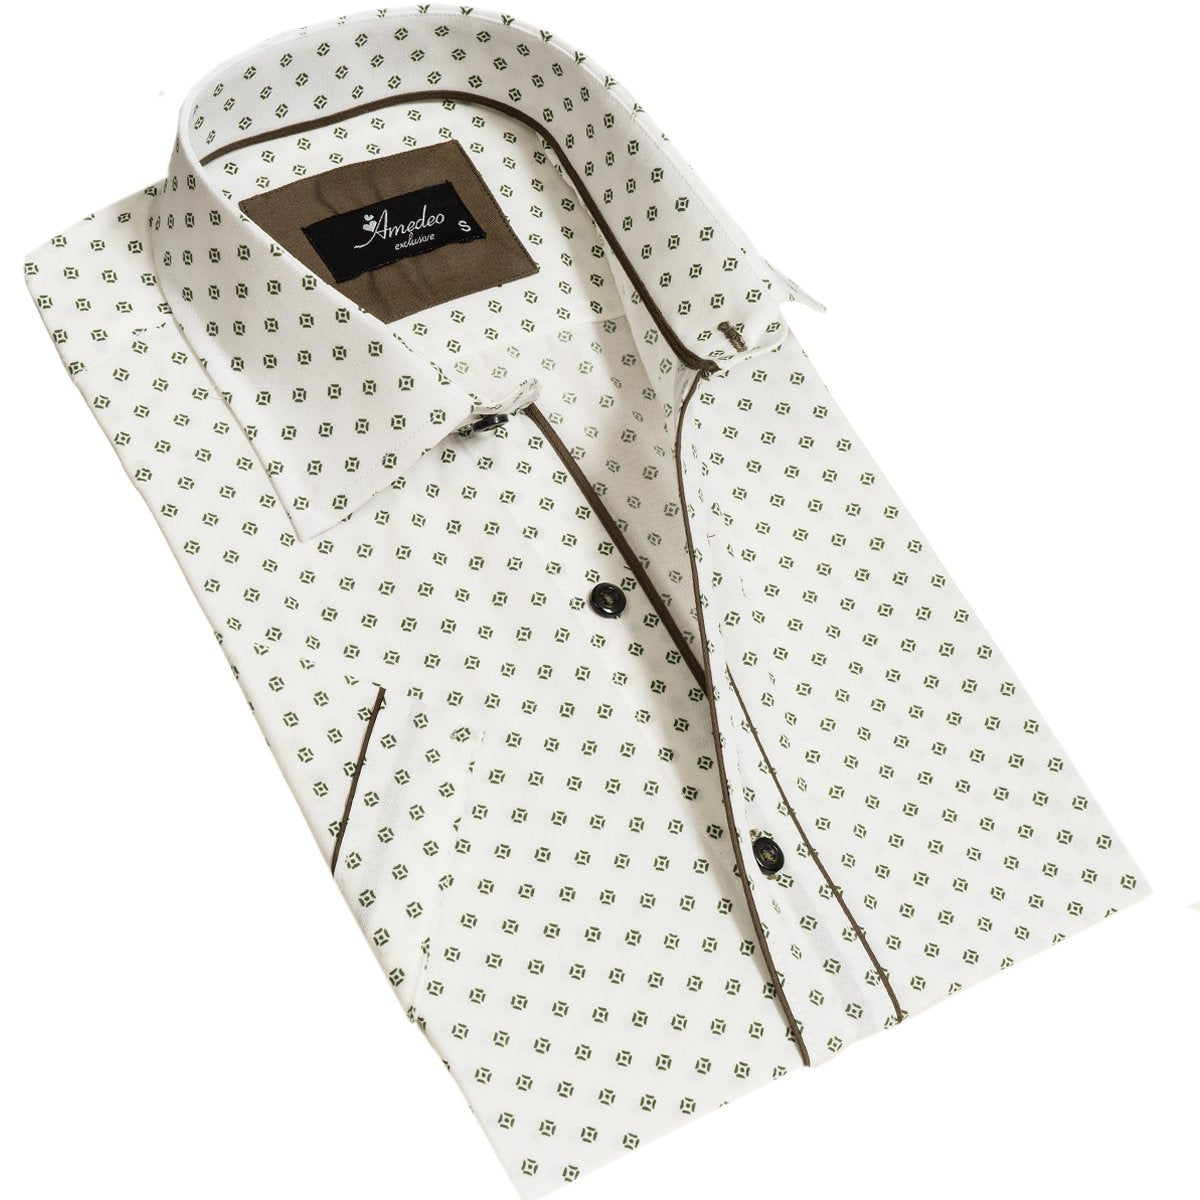 Picture of a Premium Men's Short Sleeve Button Up Shirt in Off White product only